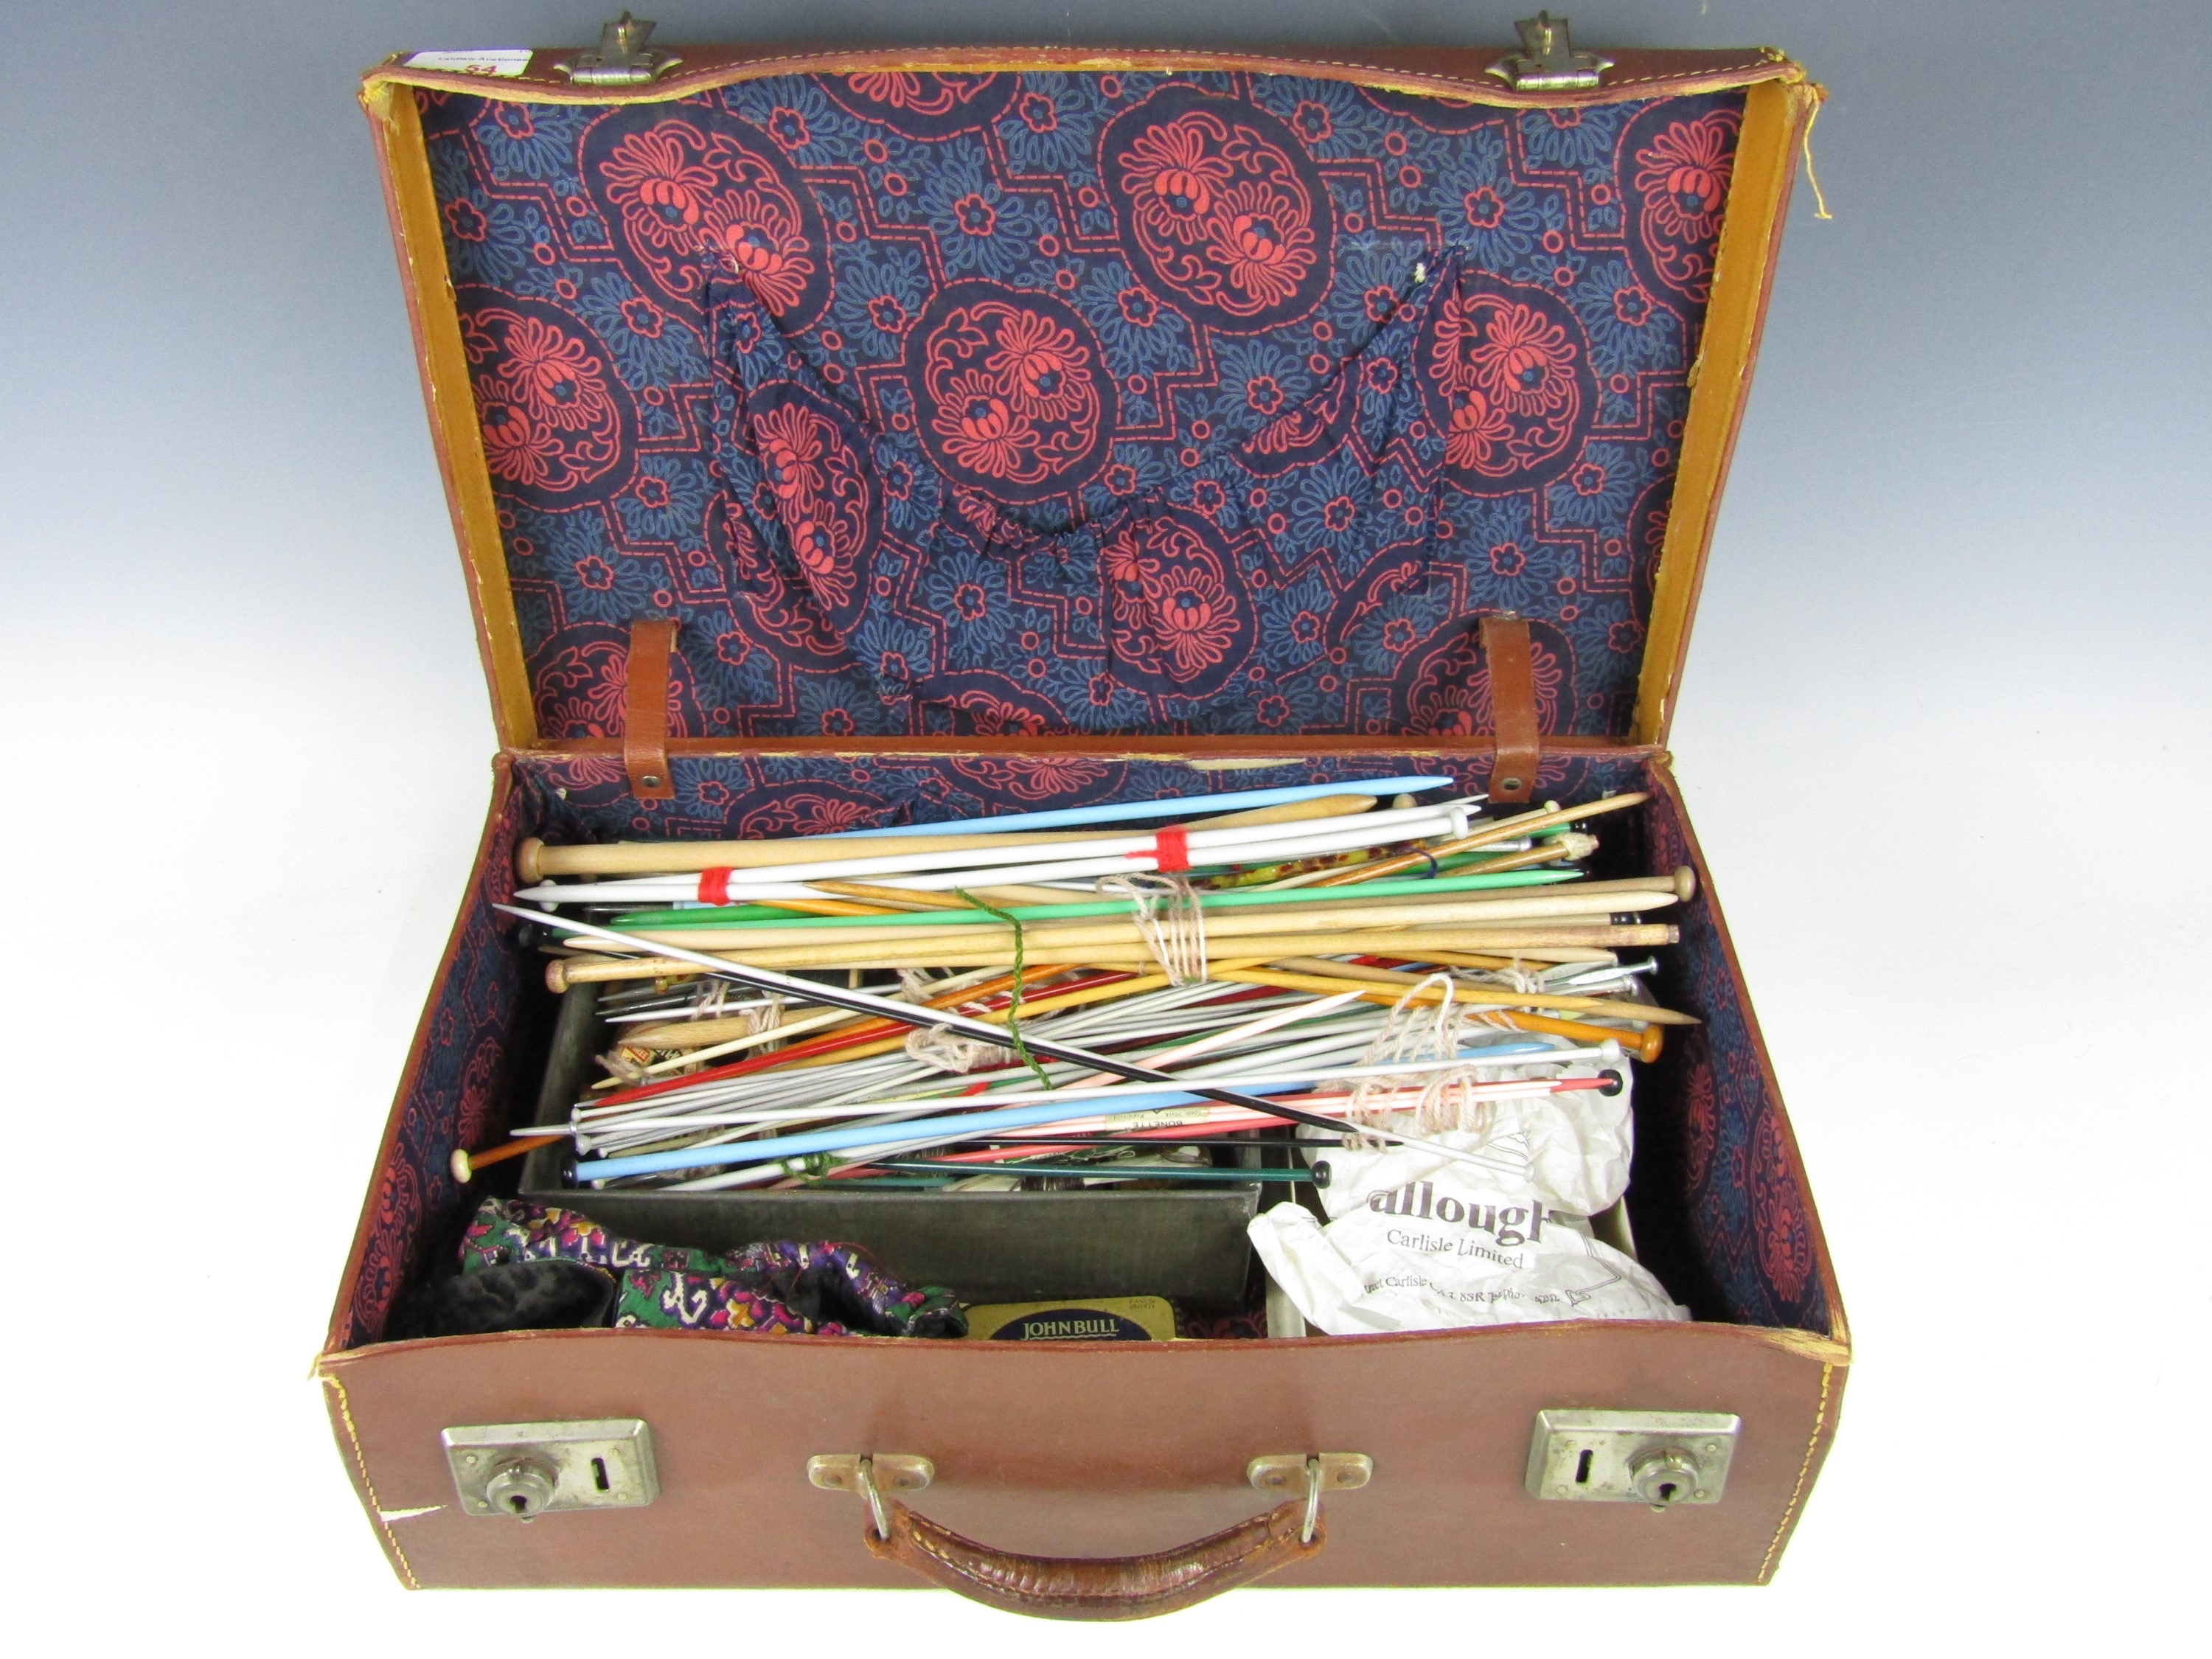 A vintage hide case containing sundry sewing and knitting accessories